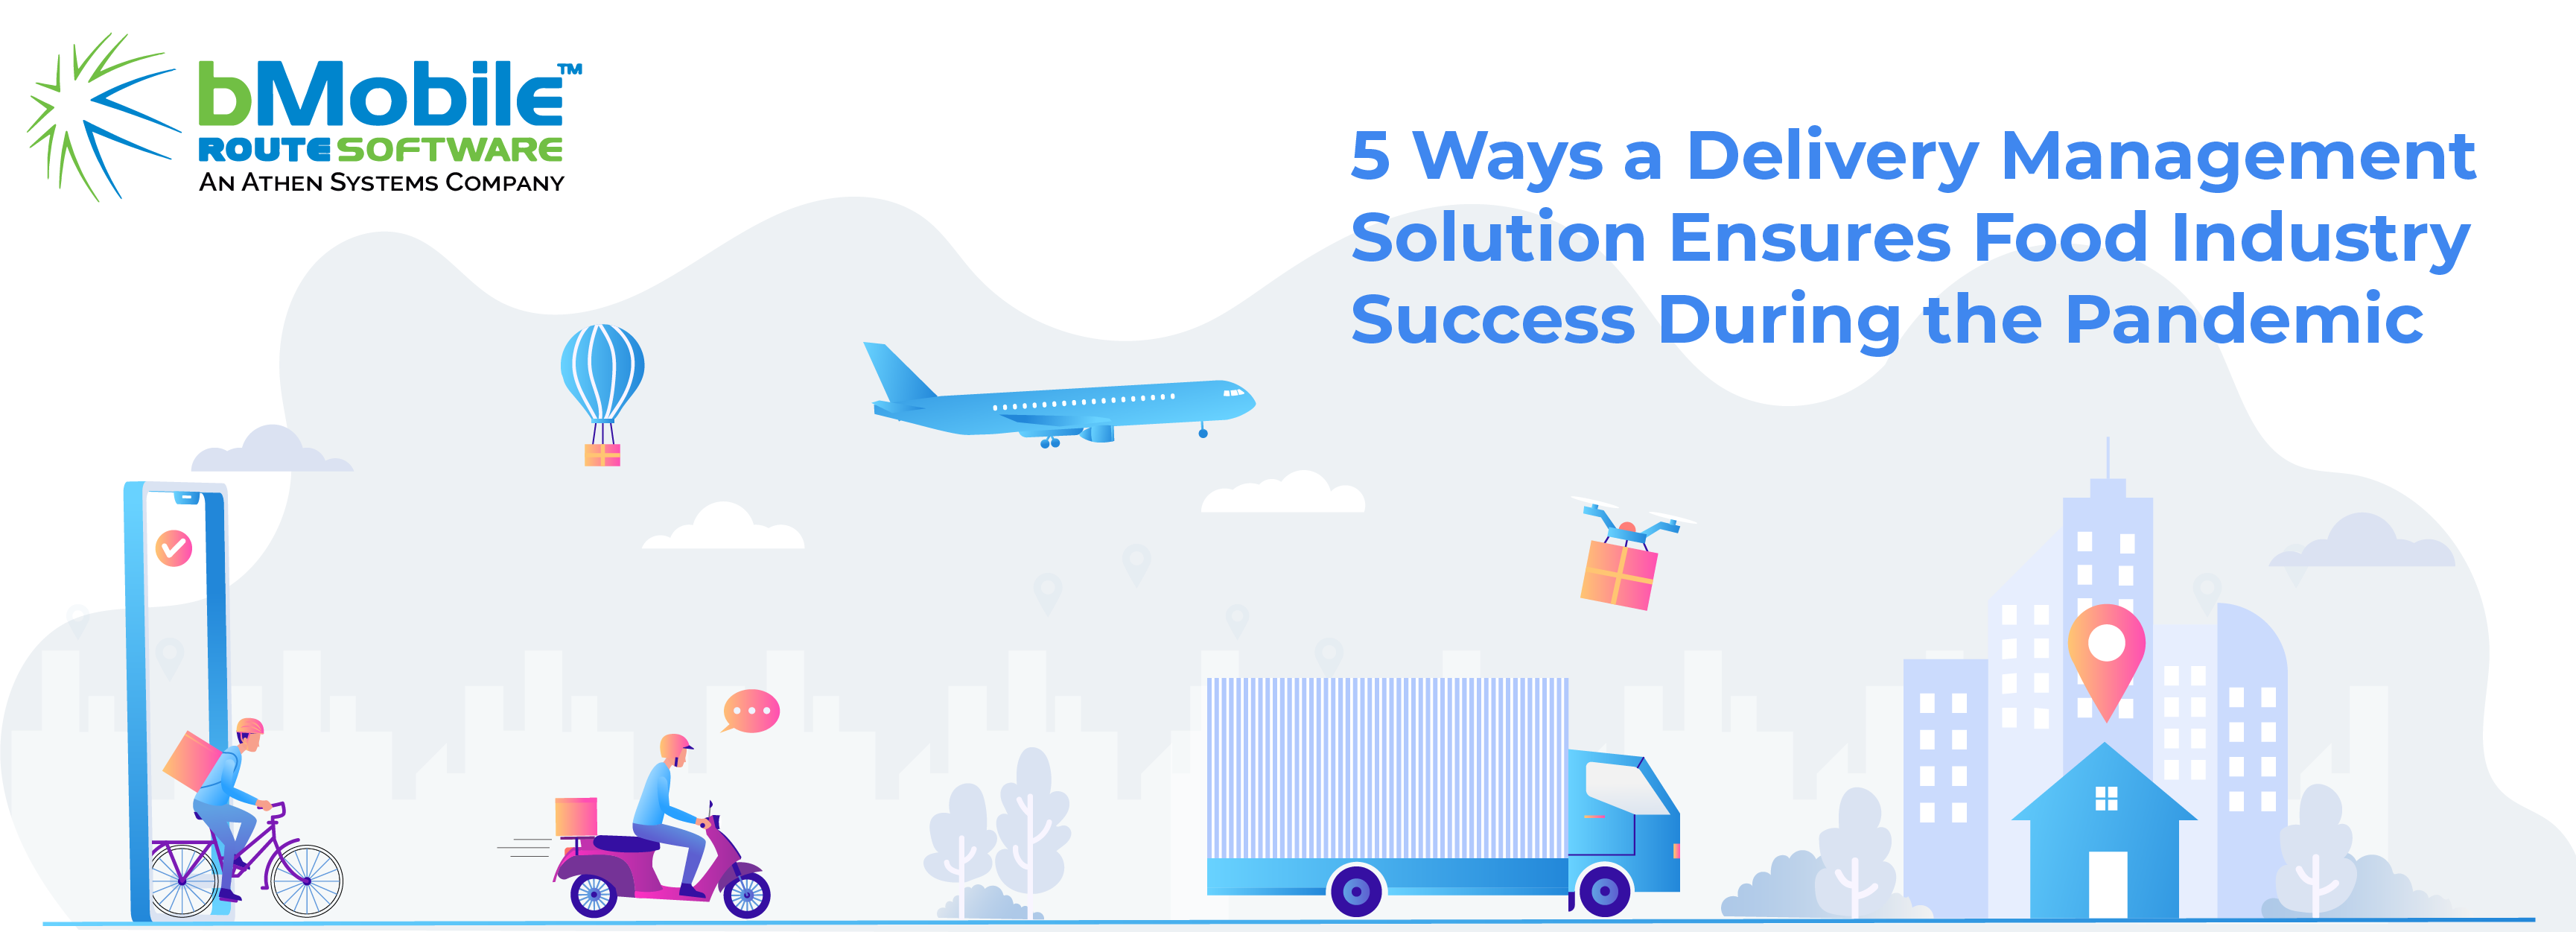 5 Ways a Delivery Management Solution Ensures Food Industry Success During the Pandemic